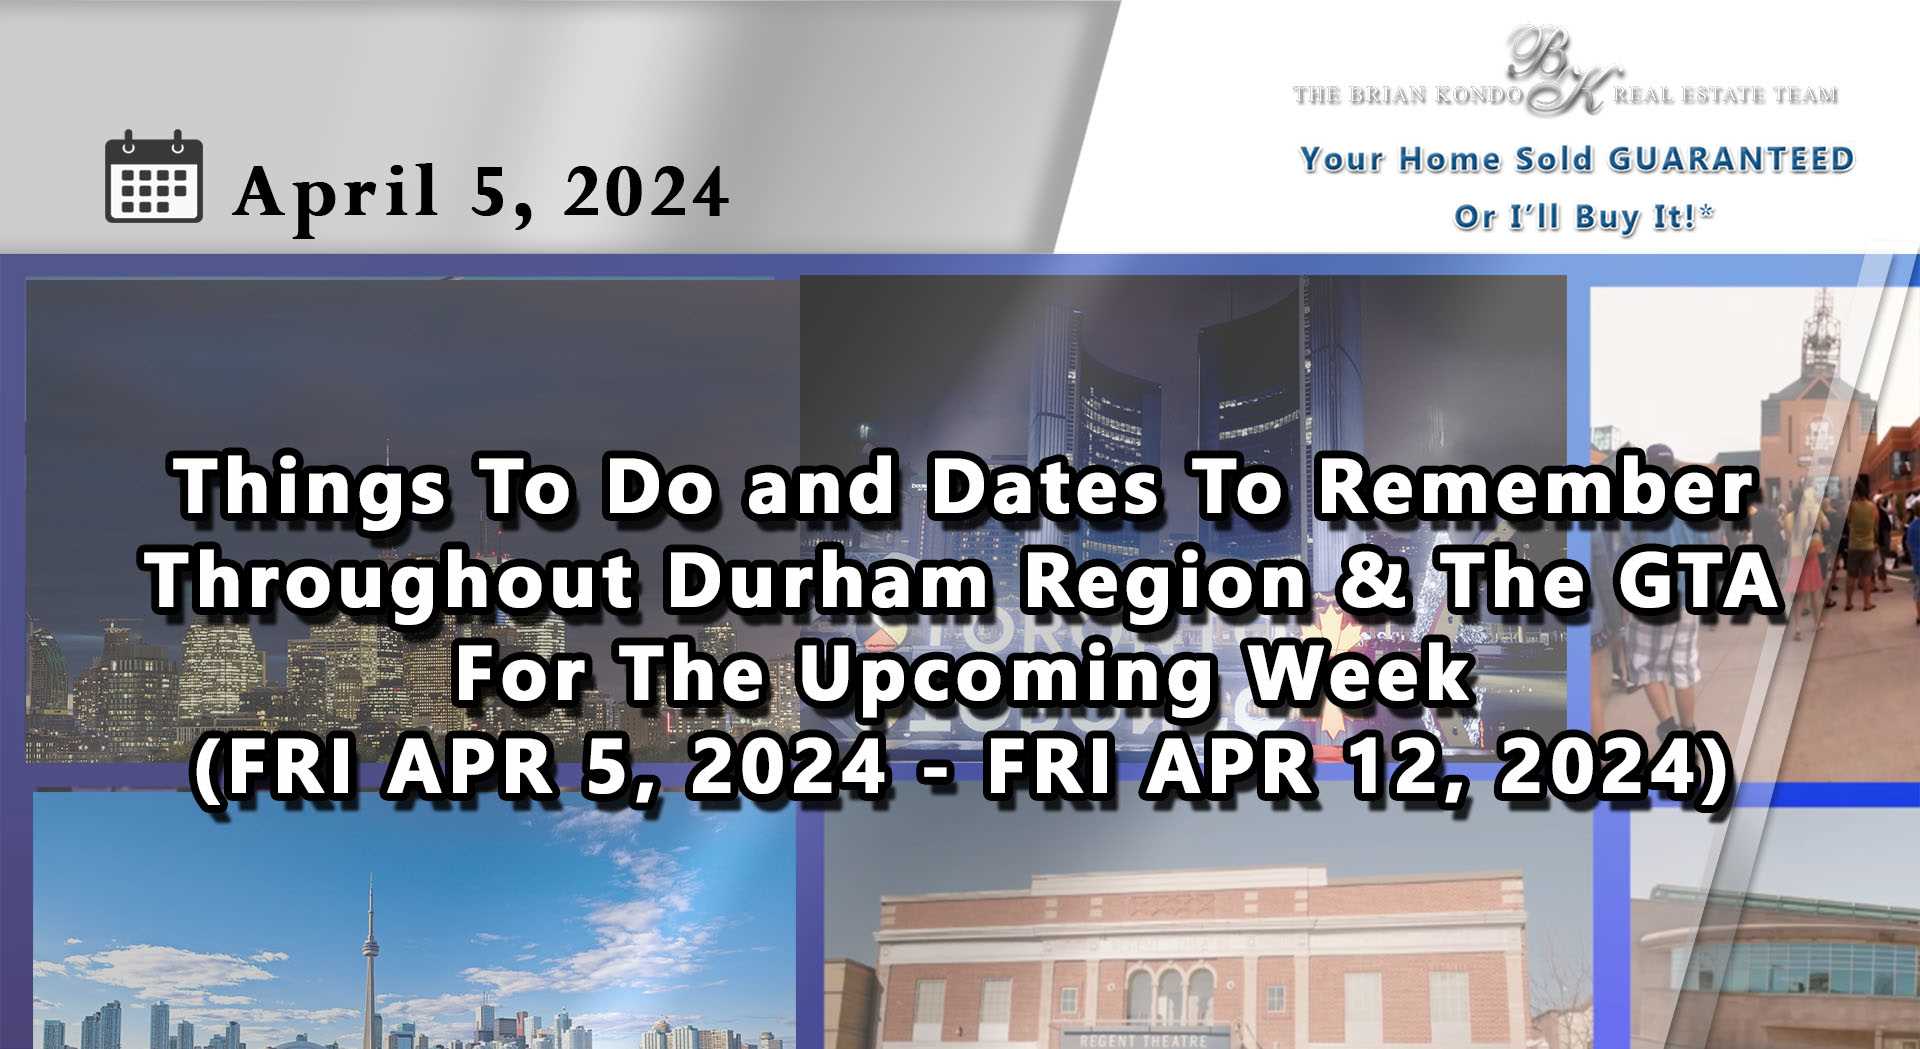 Things To Do and Dates To Remember Throughout Durham Region and The GTA For The Upcoming Week (FRI APR 5, 2024 - FRI APR 12, 2024)